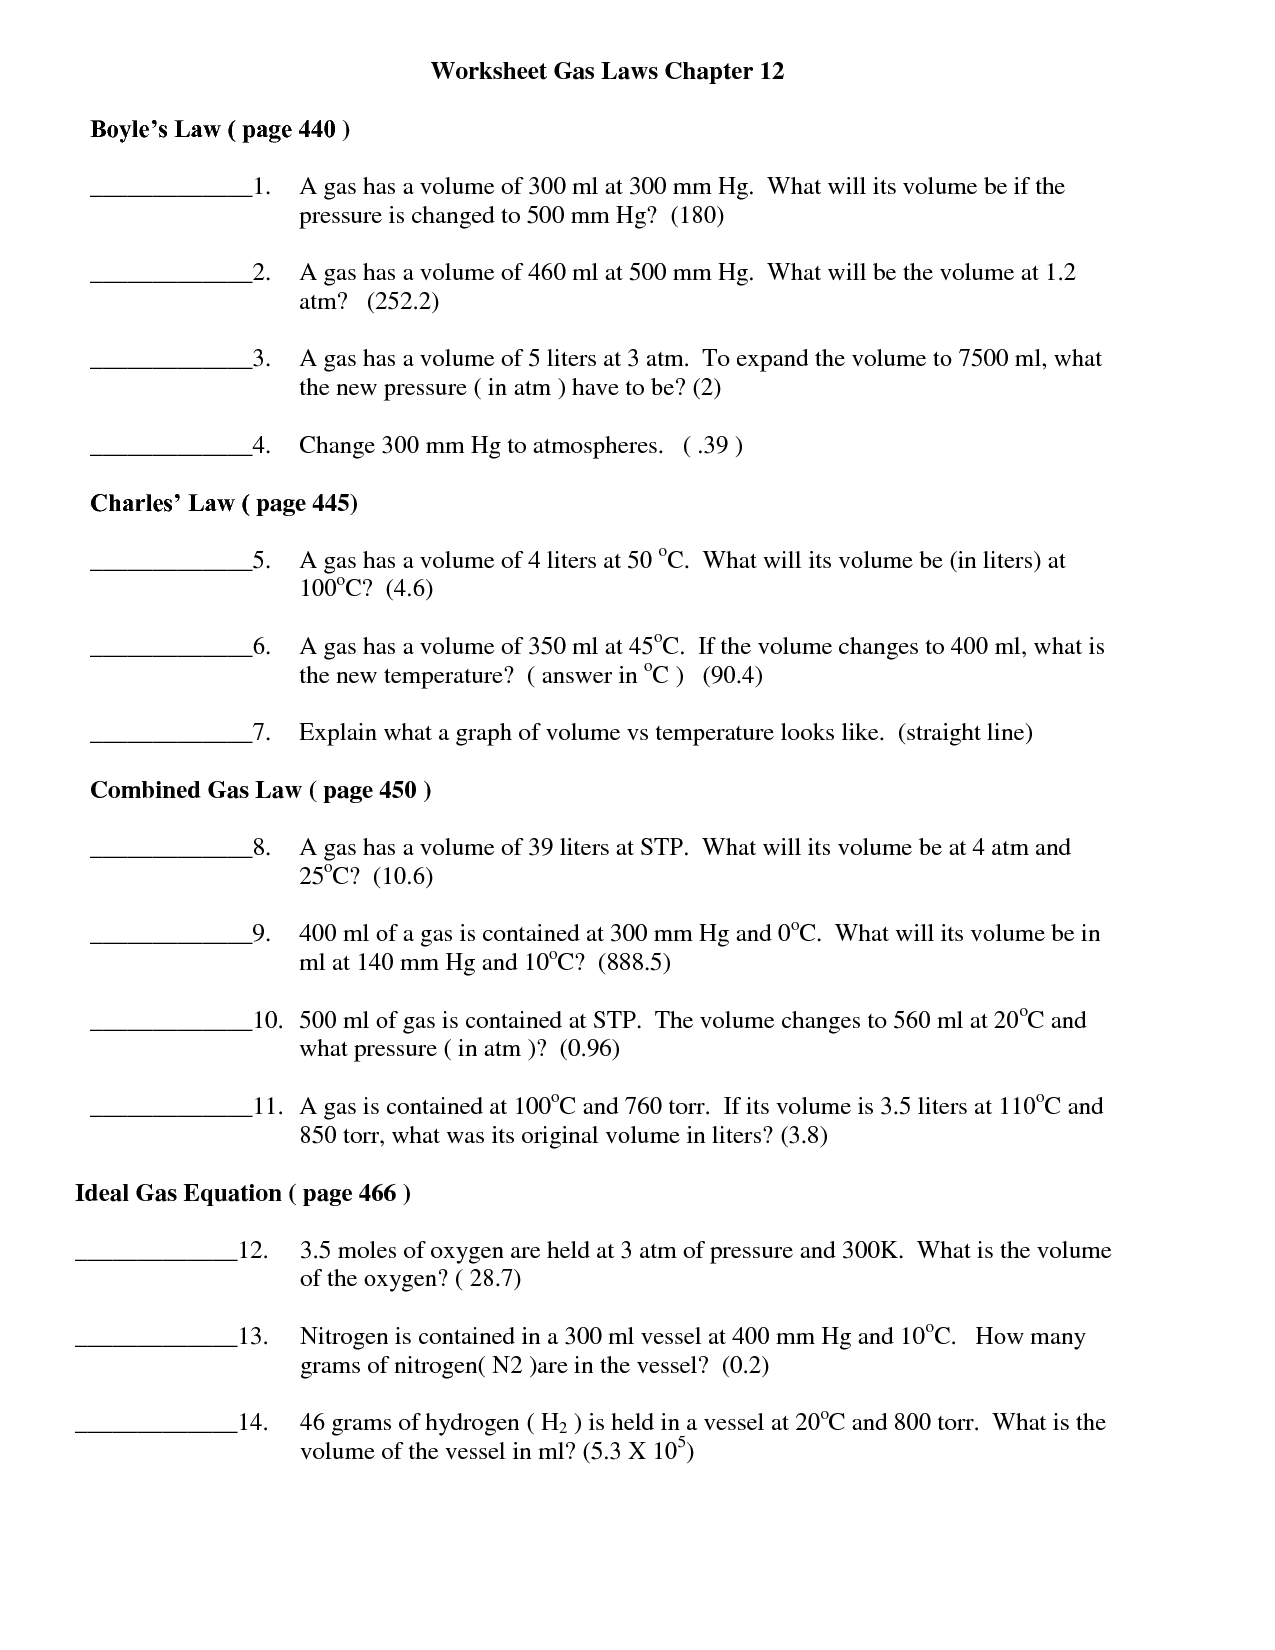 8-best-images-of-gas-law-problems-worksheet-combined-gas-law-problems-worksheet-stoichiometry